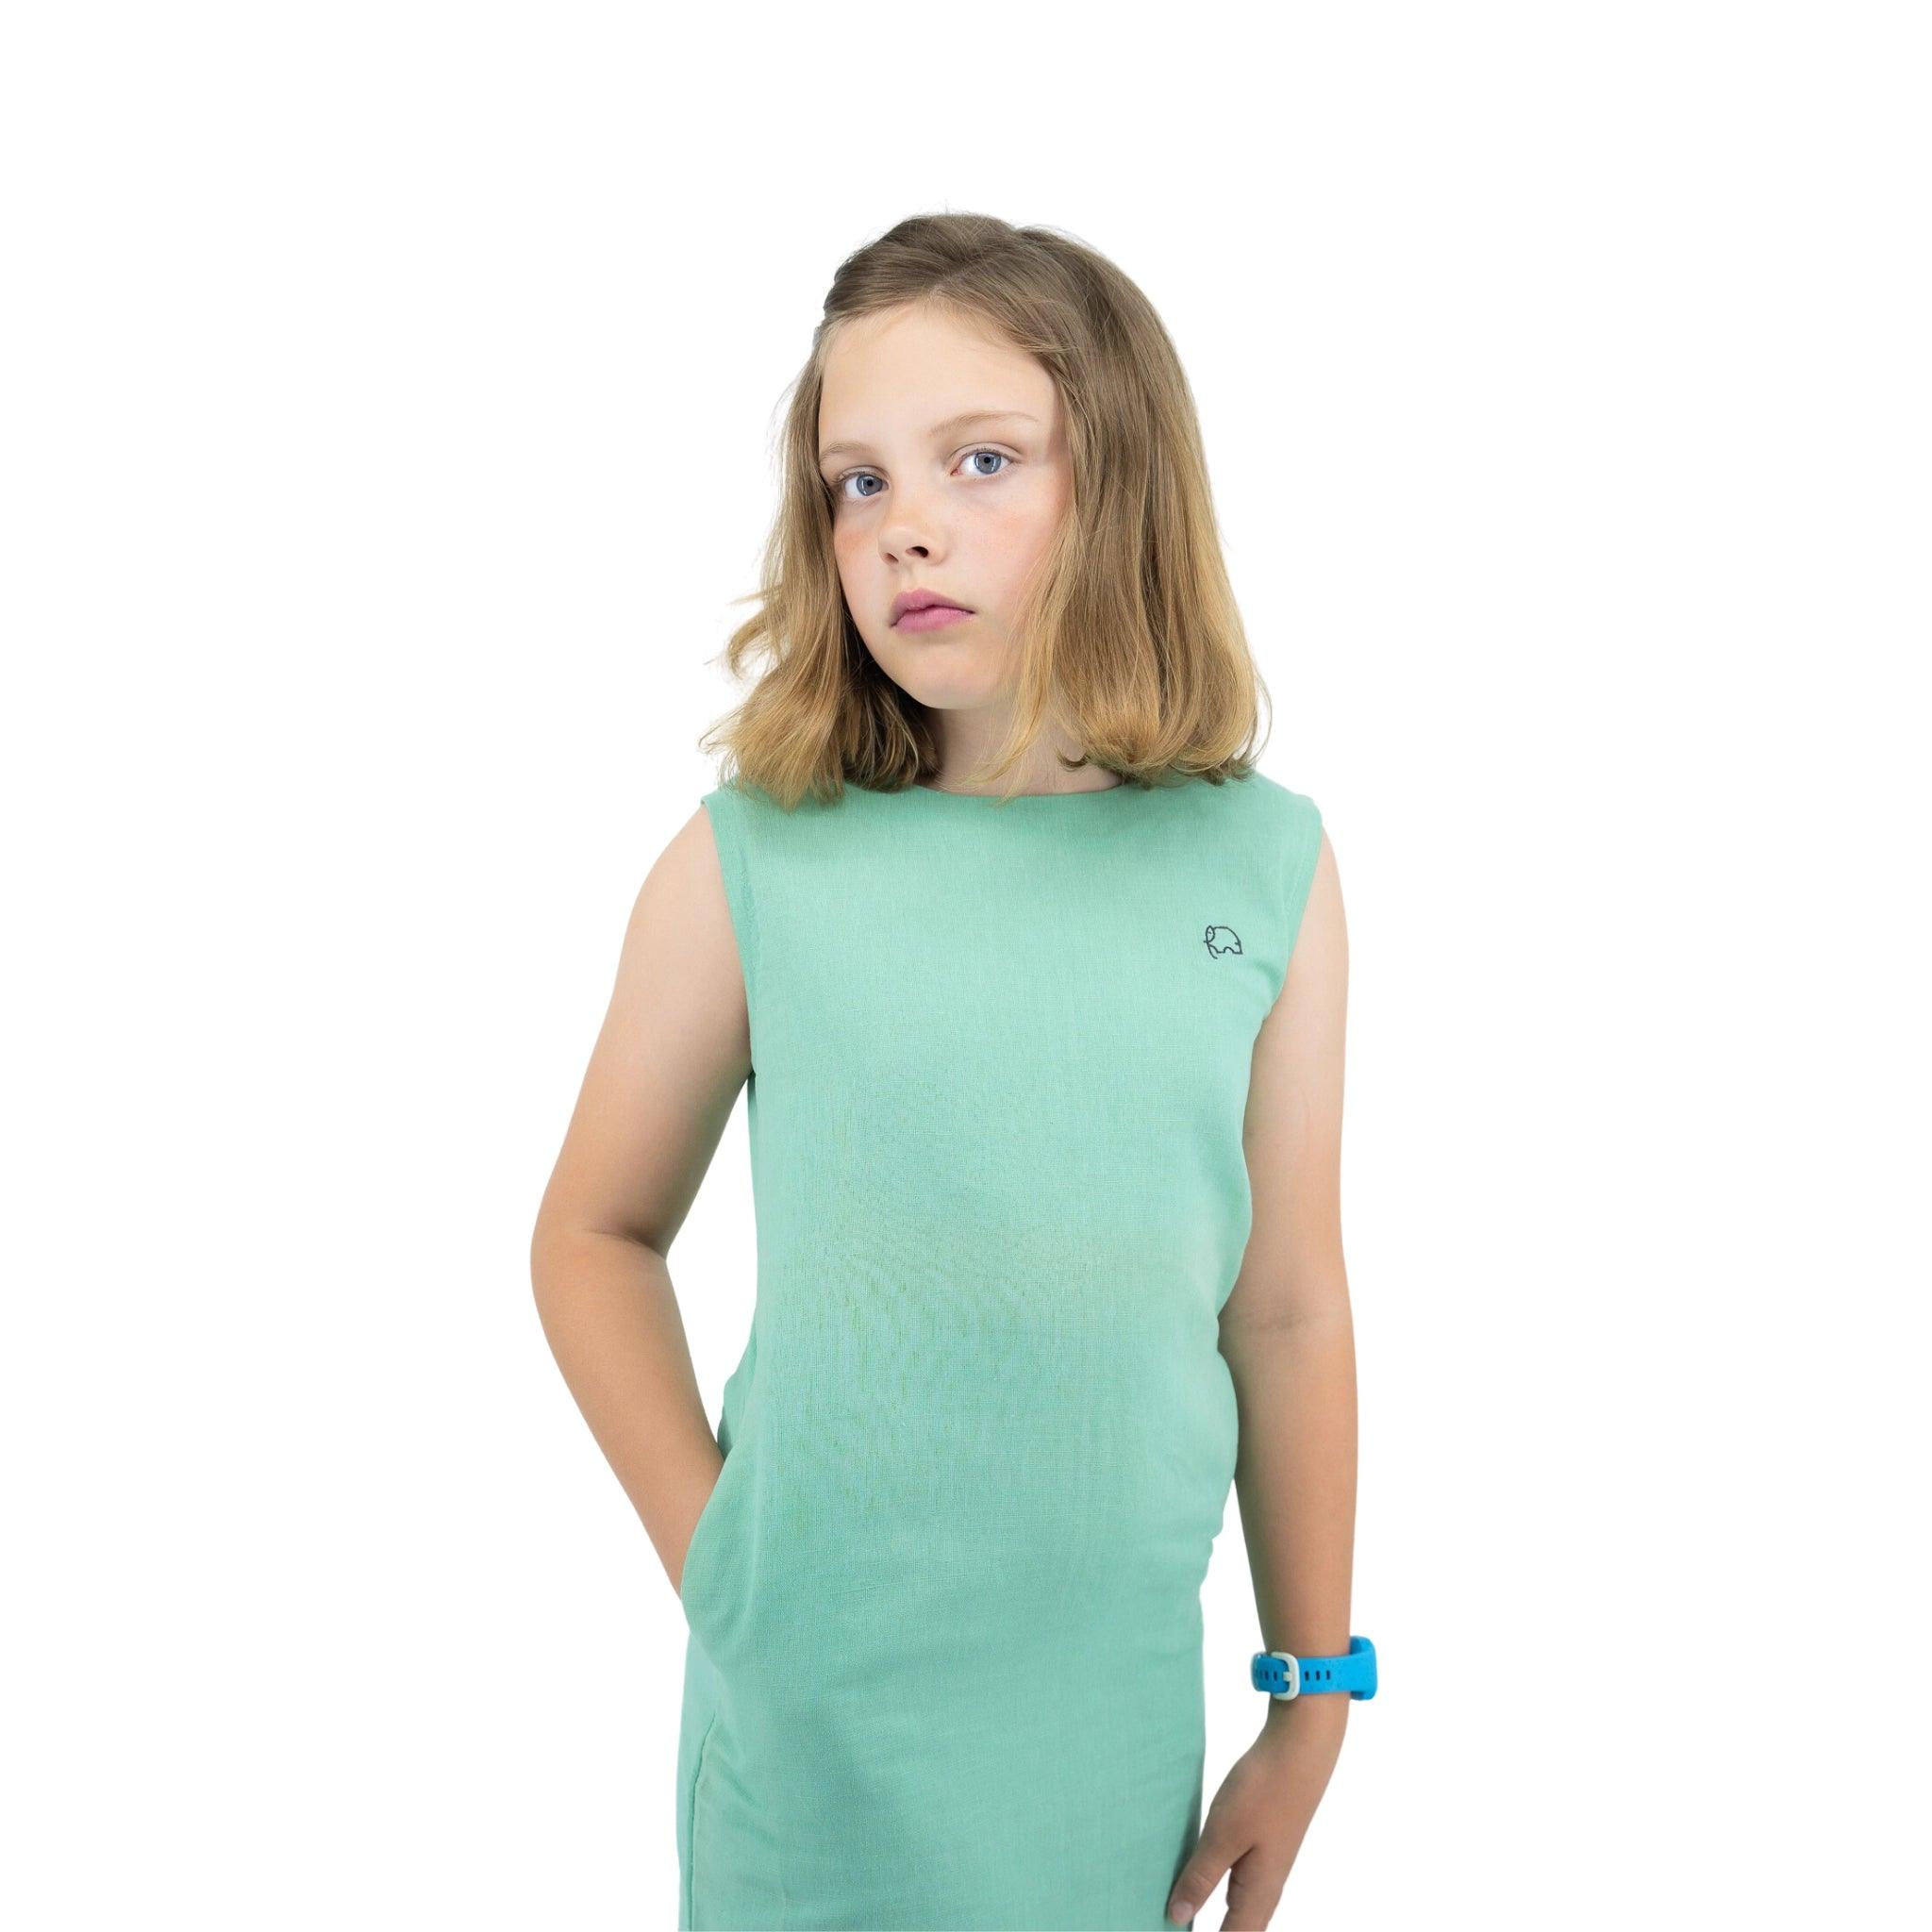 Young girl in a Karee Linen Cotton Round Neck Frock for Kids in Neptune Green standing against a white background, looking slightly to the side with a thoughtful expression.